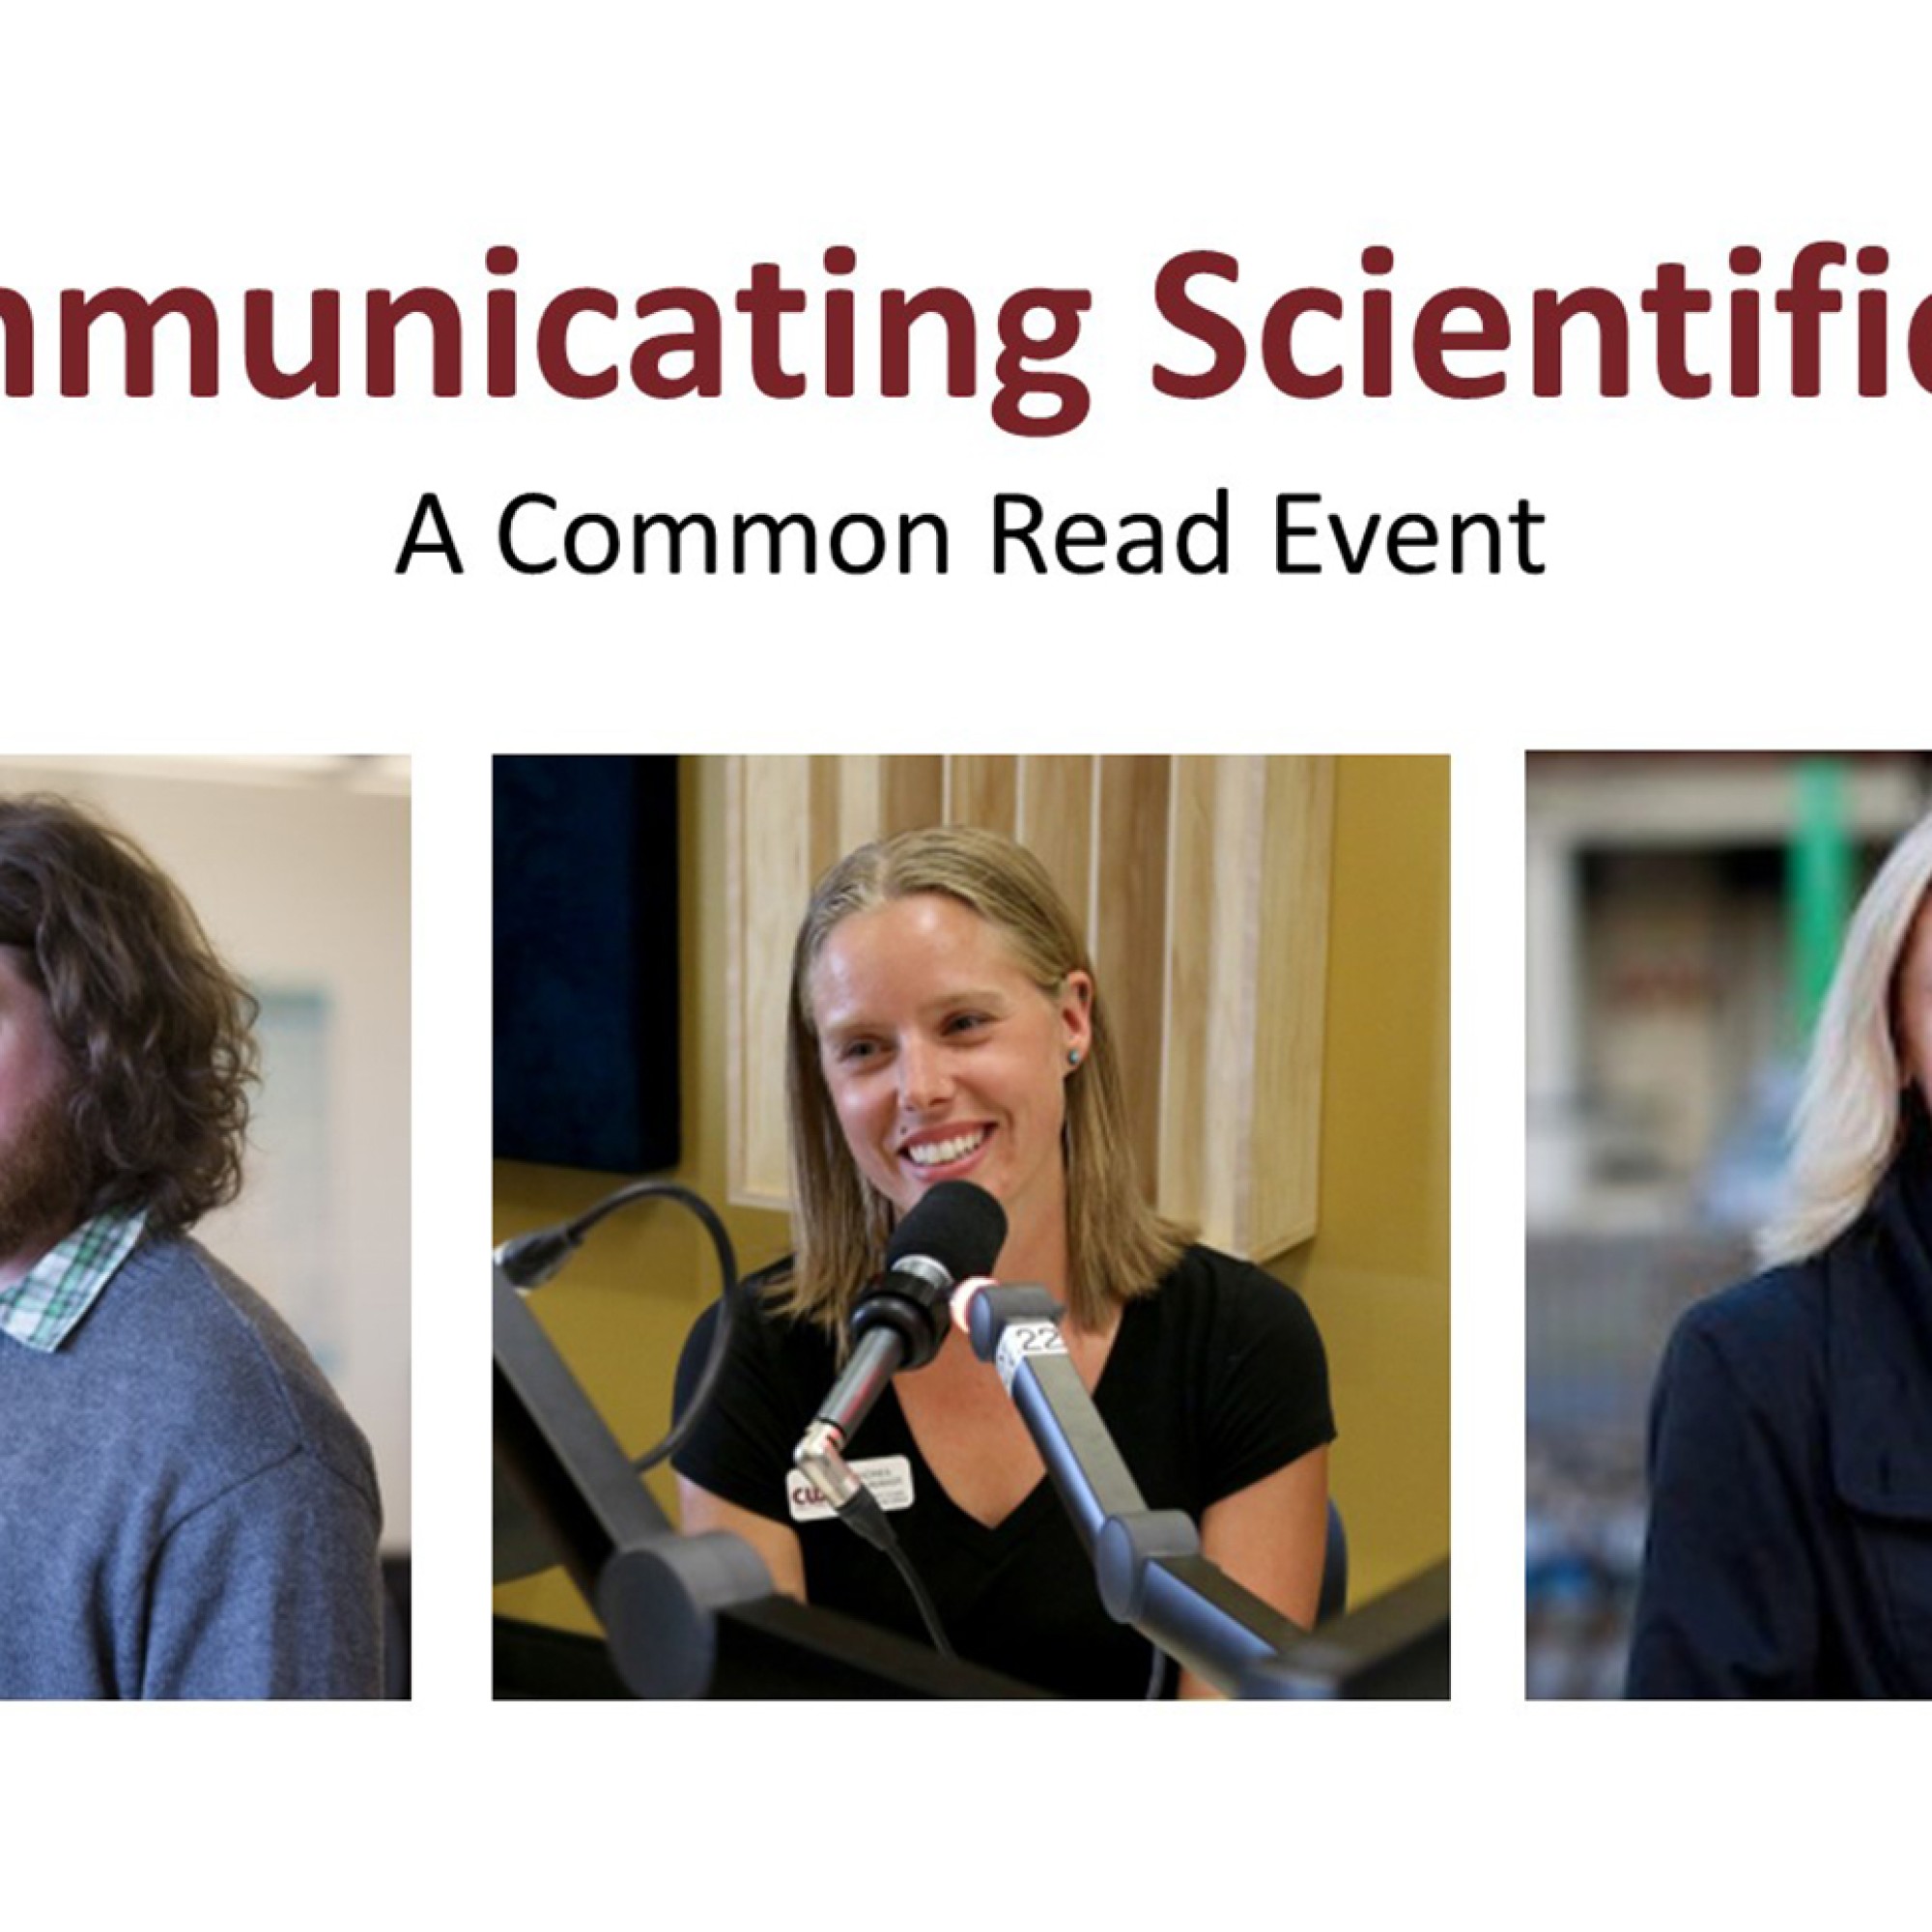 Communicating Scientifically, a Common Read Event